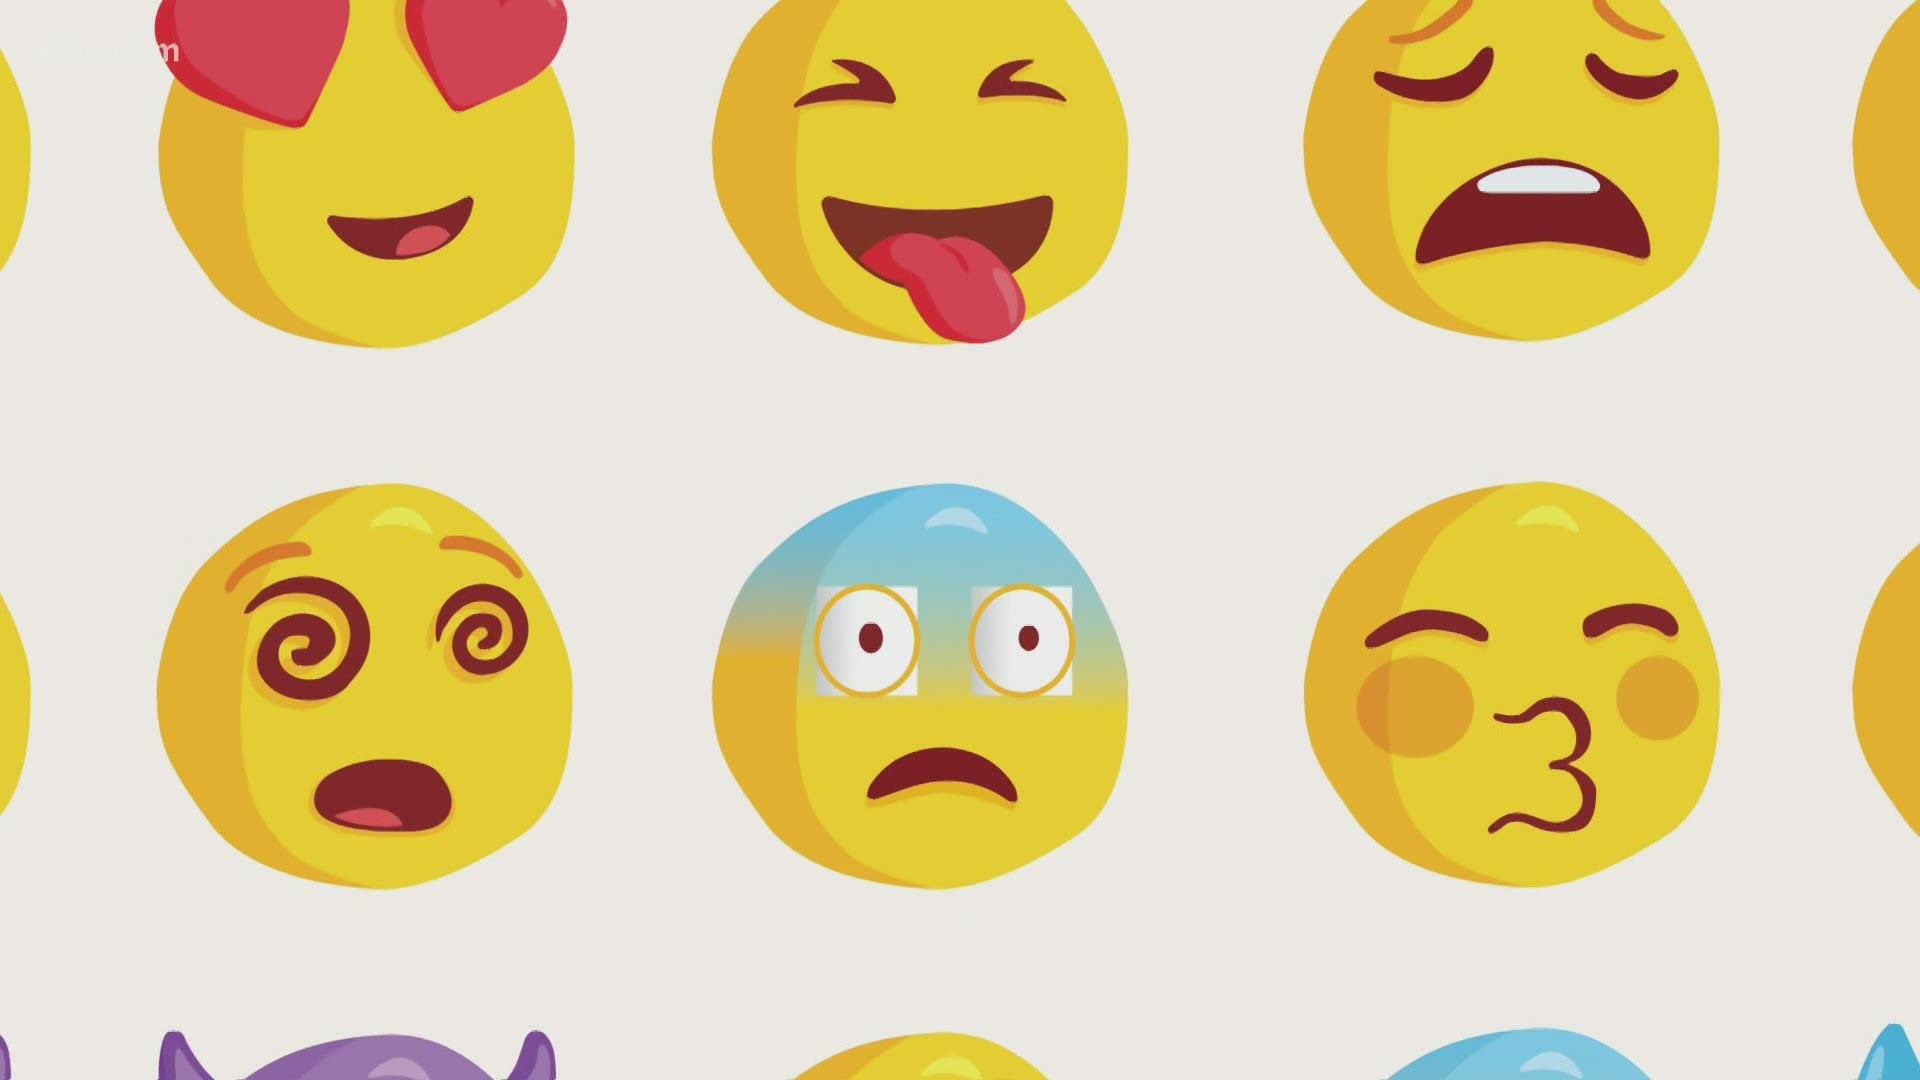 Researchers at the University of Tennessee developed a tool to track emoji requests in real-time